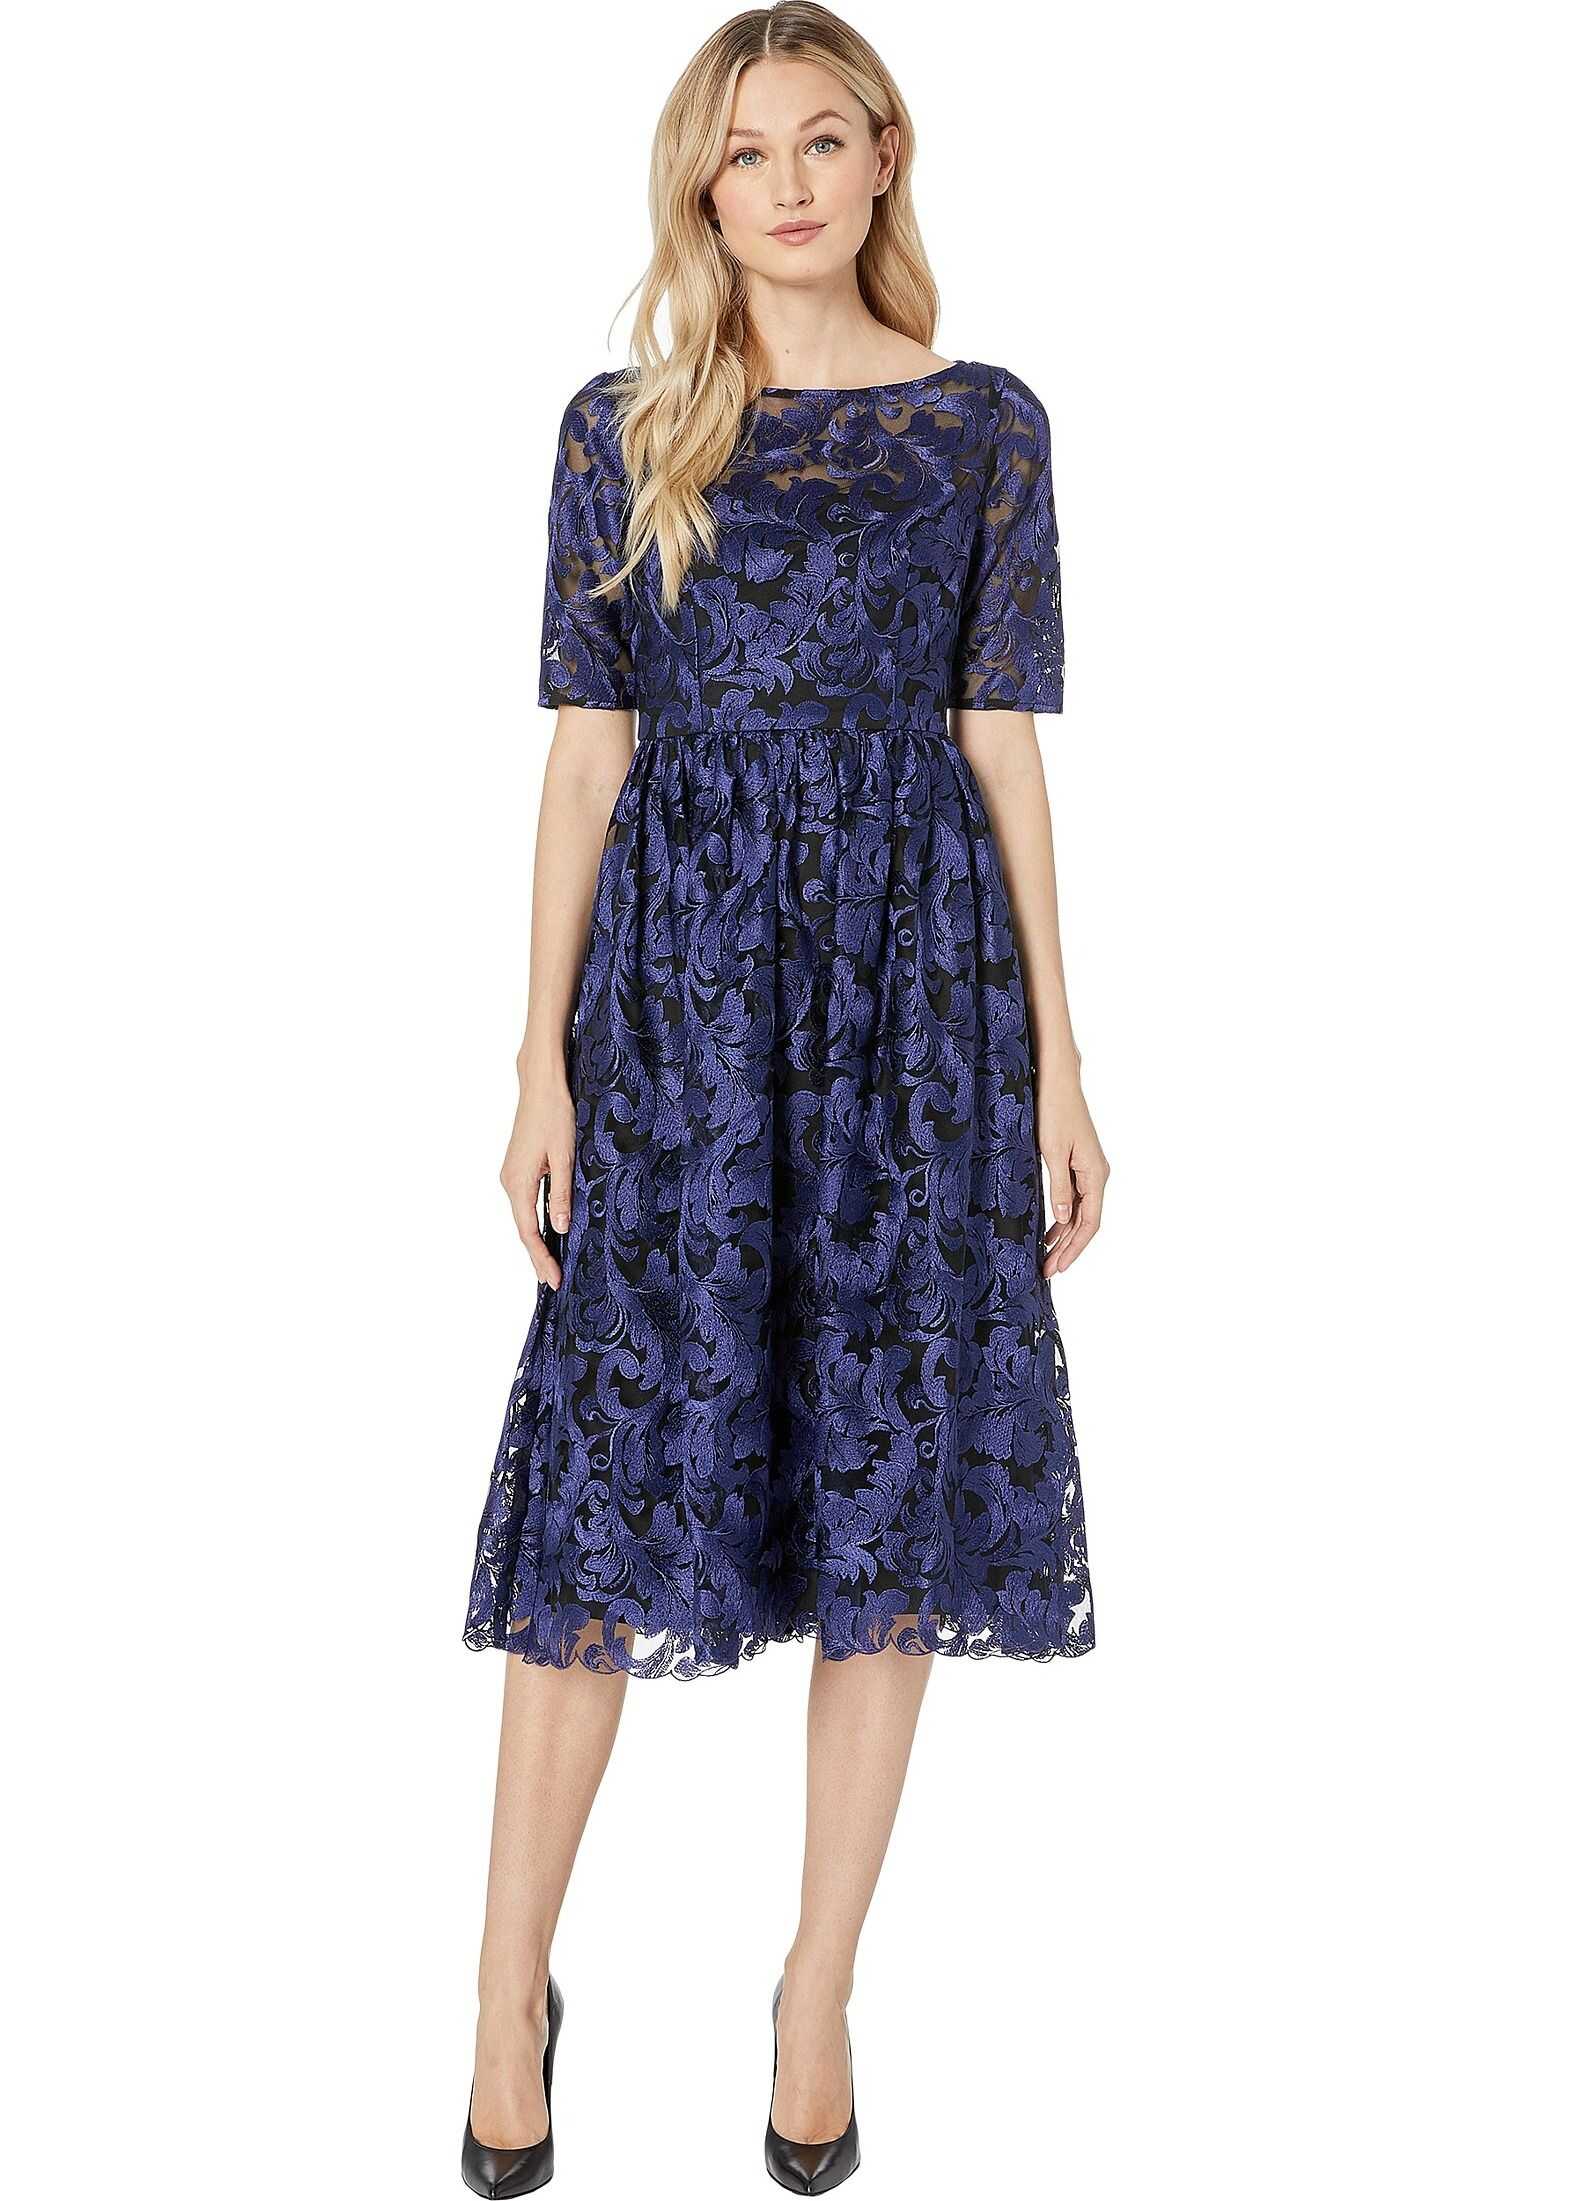 Adrianna Papell Embroidered Dress Blue Violet